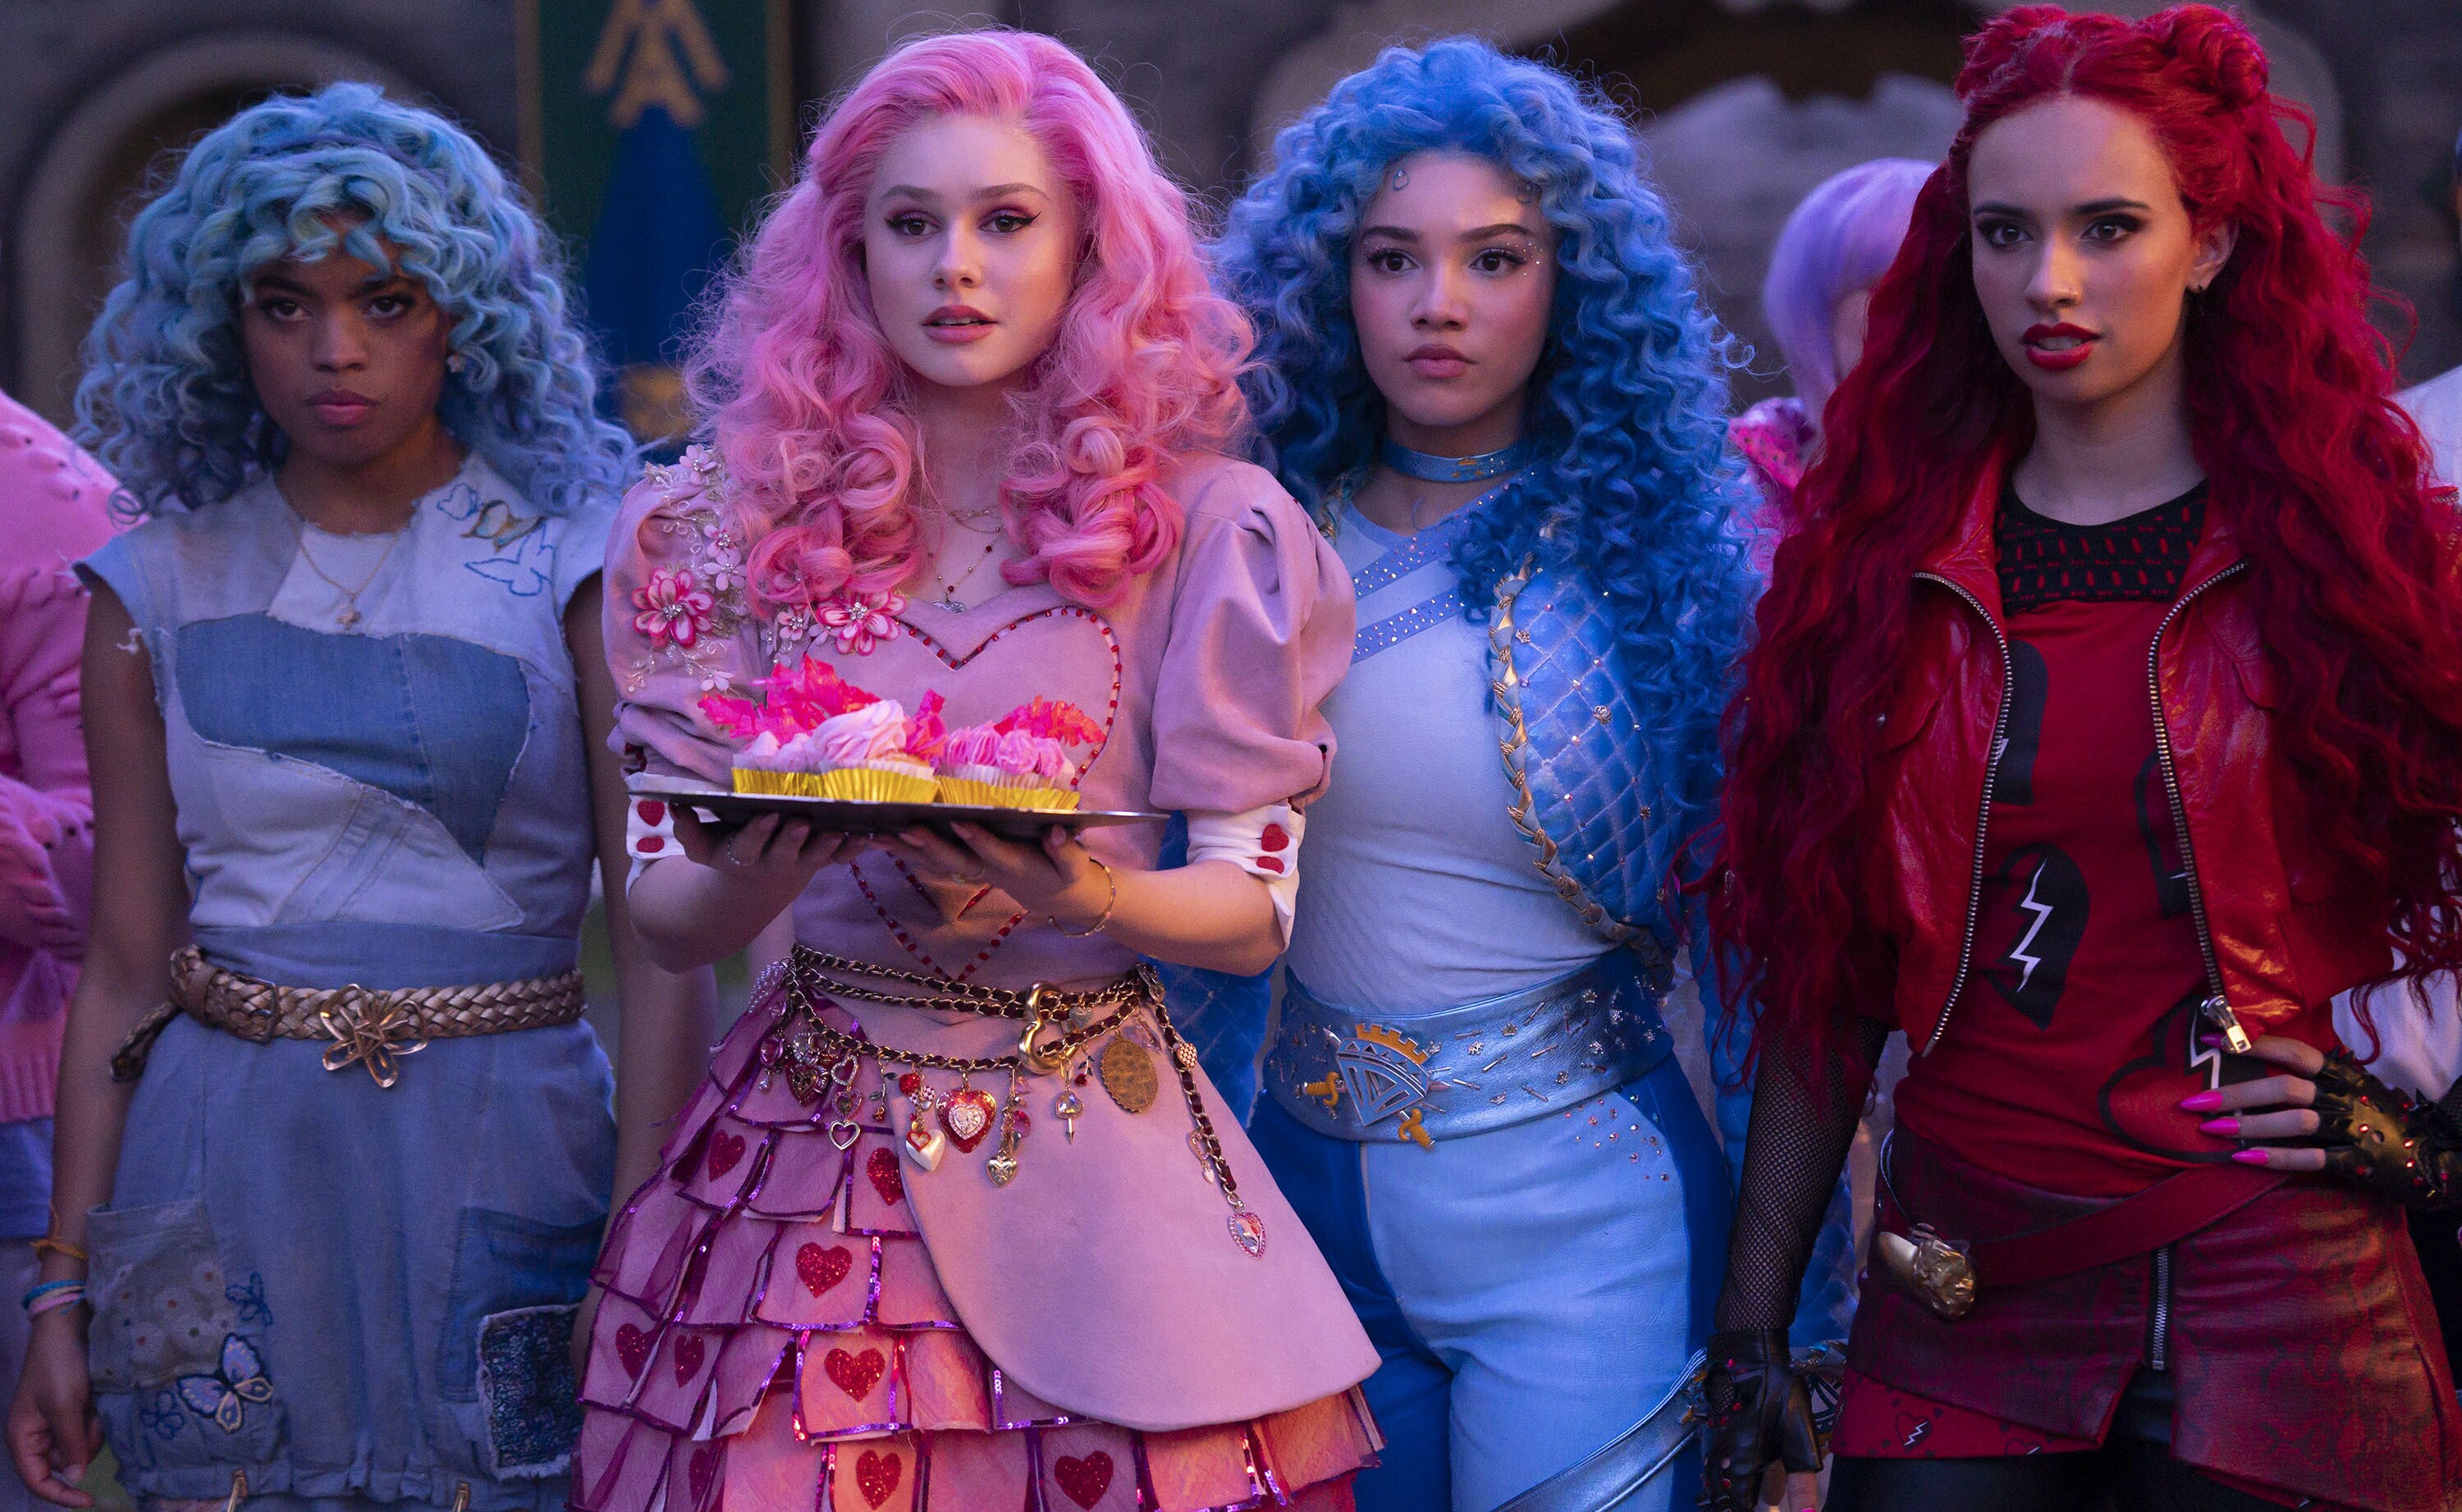 A group of girls in very brightly colored wigs, one in pale blue, one in bubblegum pink, another in a slightly darker blue, and one in red.